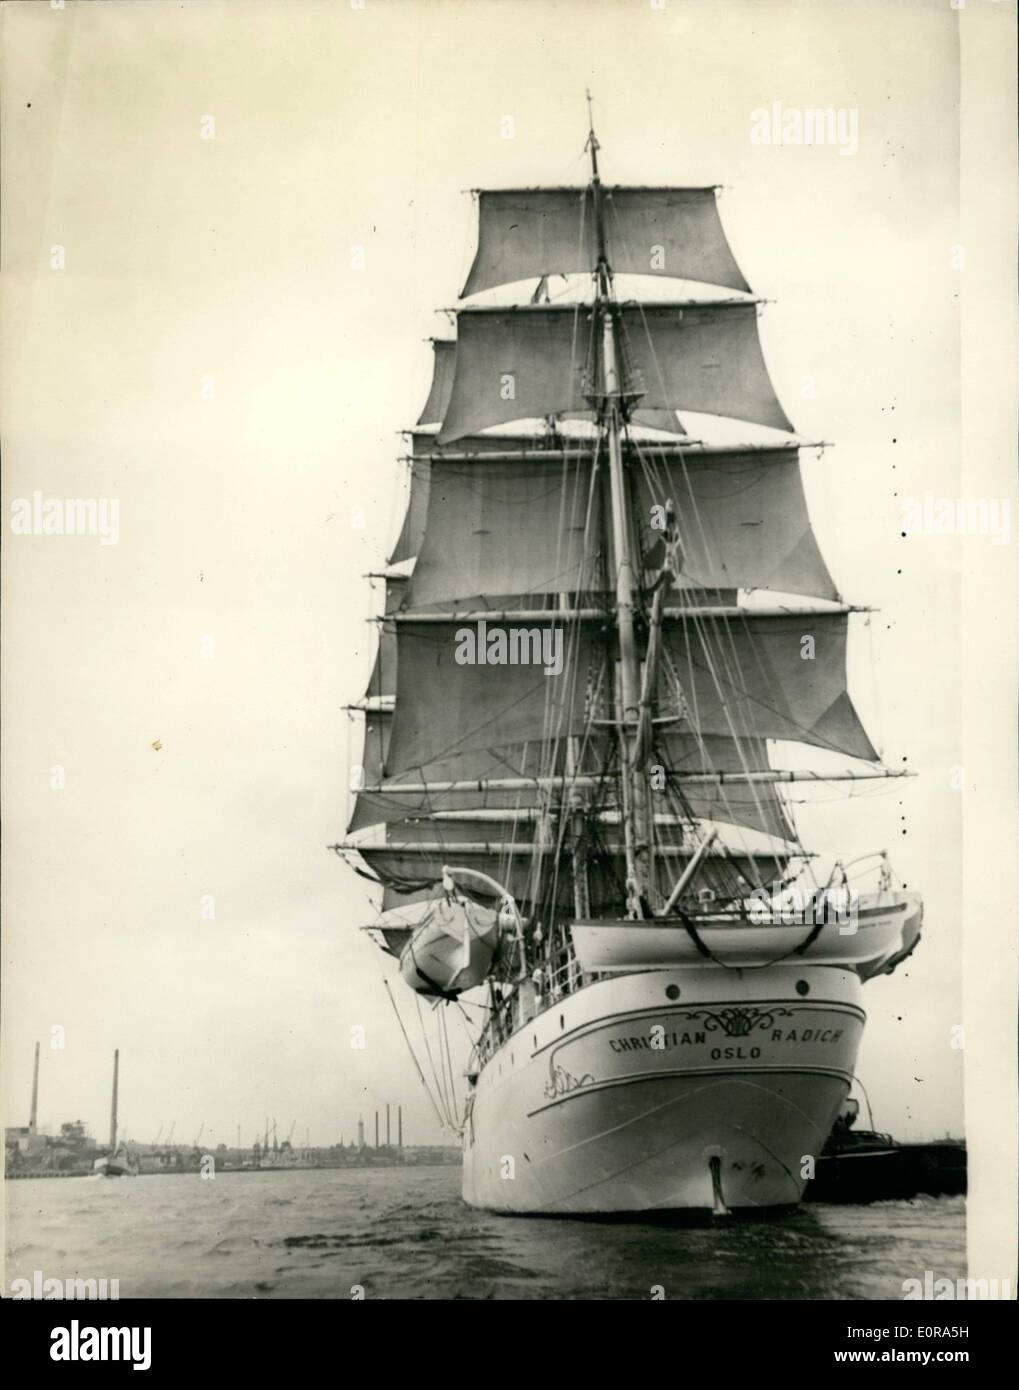 Sep. 09, 1958 - The ''Christian Radich'' visits London.:The three-masted square rigged Norwegian sailing ship ''Christian Radich'', which is one of the stars of the Cinemiracle film ''Windjammer'', now being shown in London at the Odeon Cinemiracle Theatre, sailed up the Thames today from Gravesend, to berth at the West India Docks, for four days, during which time Londoners will be allowed aboard.The Ship is manned by 74 cadets with Captain Kjell in command. Photo shows view of the Christian Radich, as she left Gravesend, where she arrived last night, on her way to London today. Stock Photo